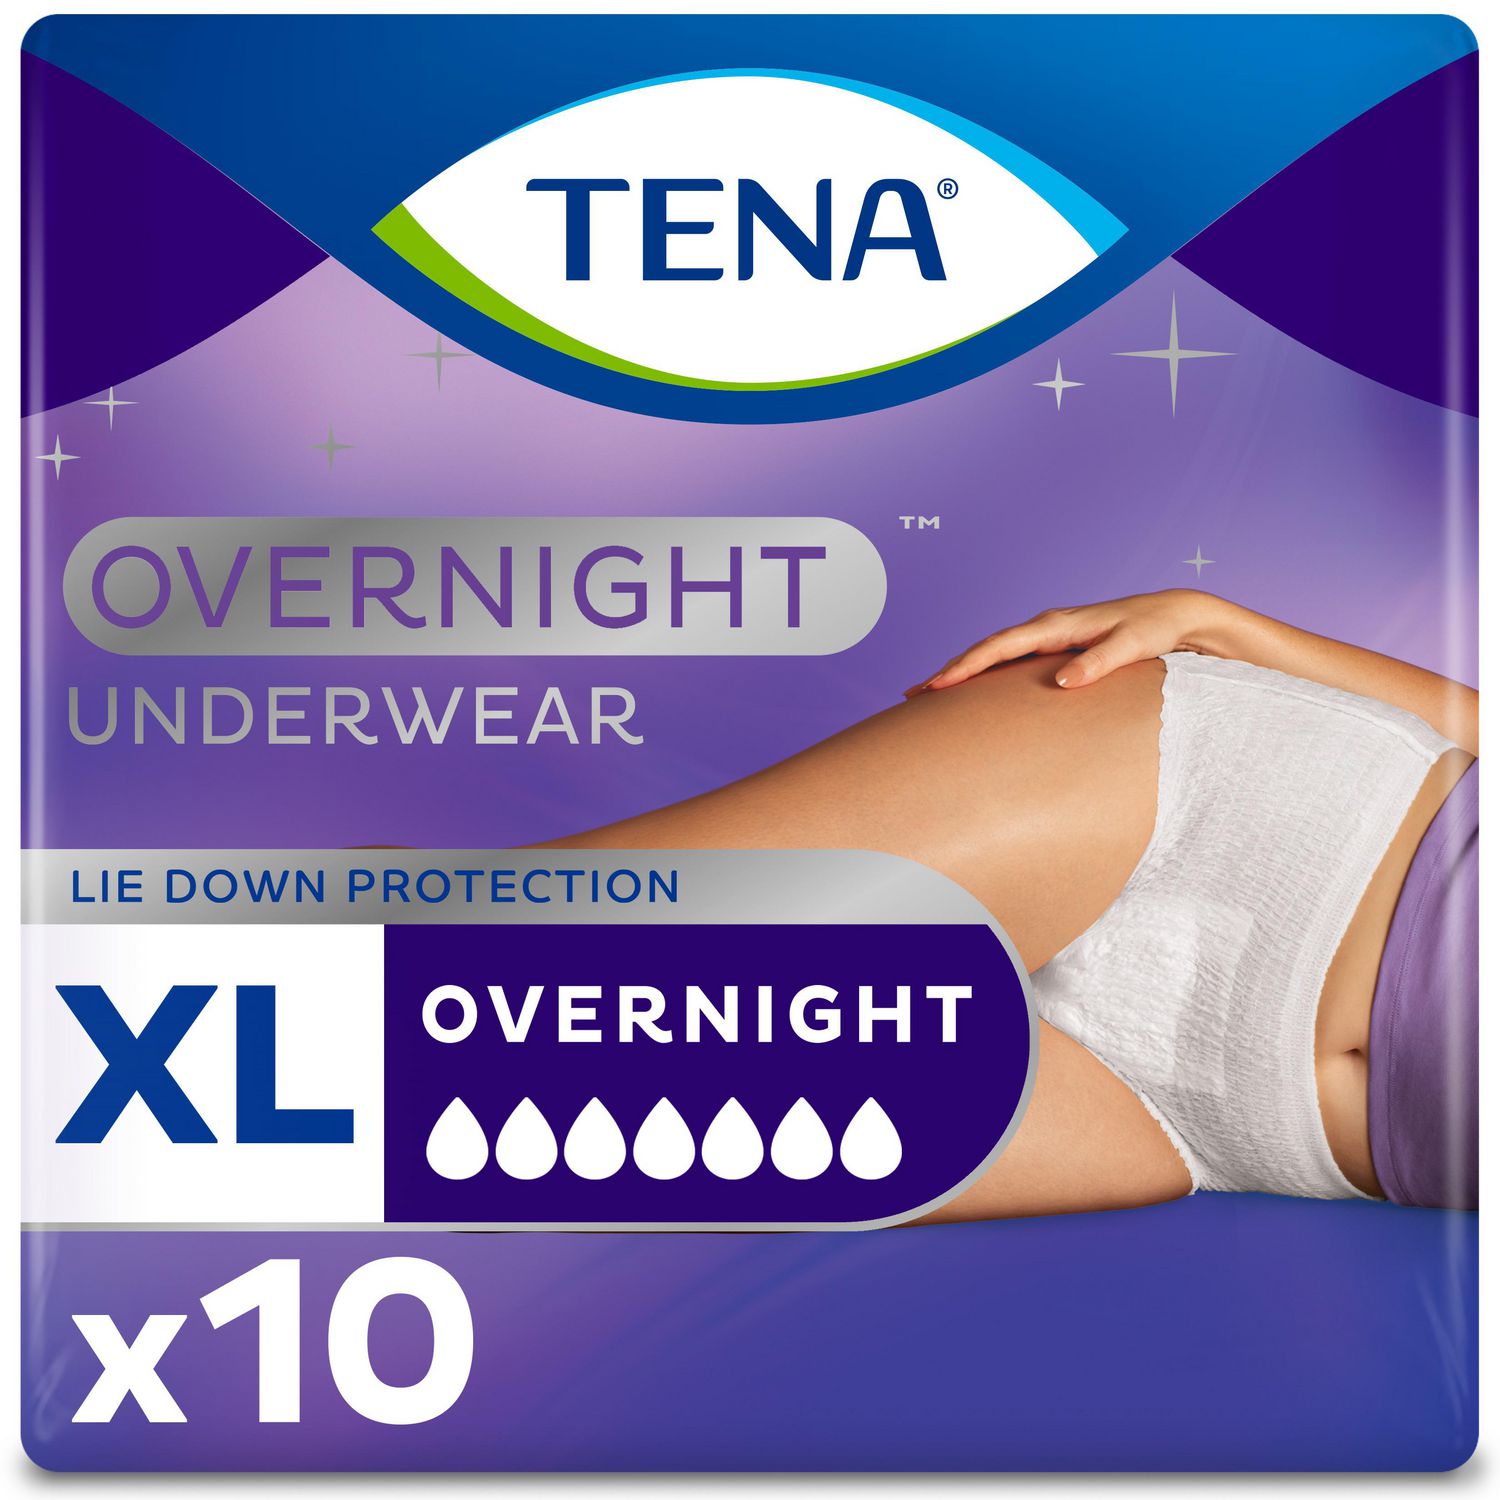 Keep Control with TENA's incontinence underwear made for men